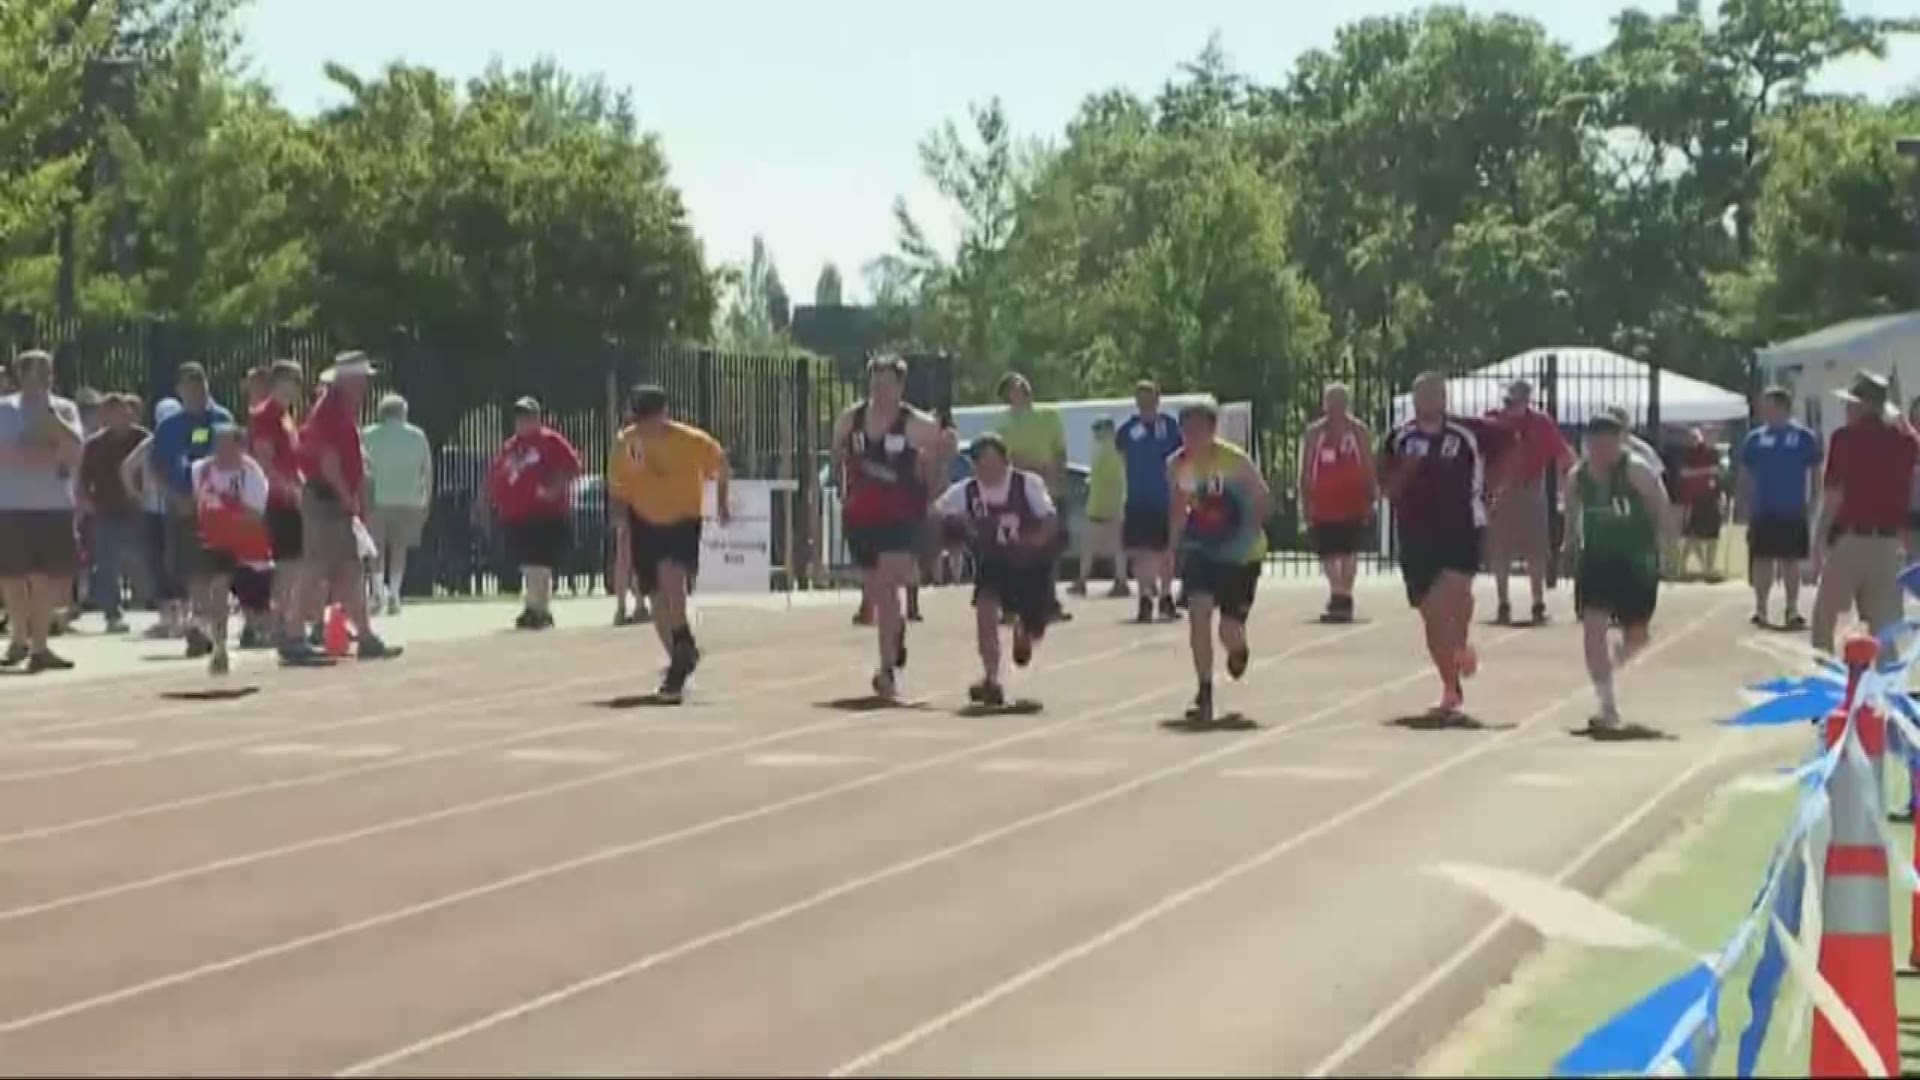 Special Olympics Oregon facing more issues